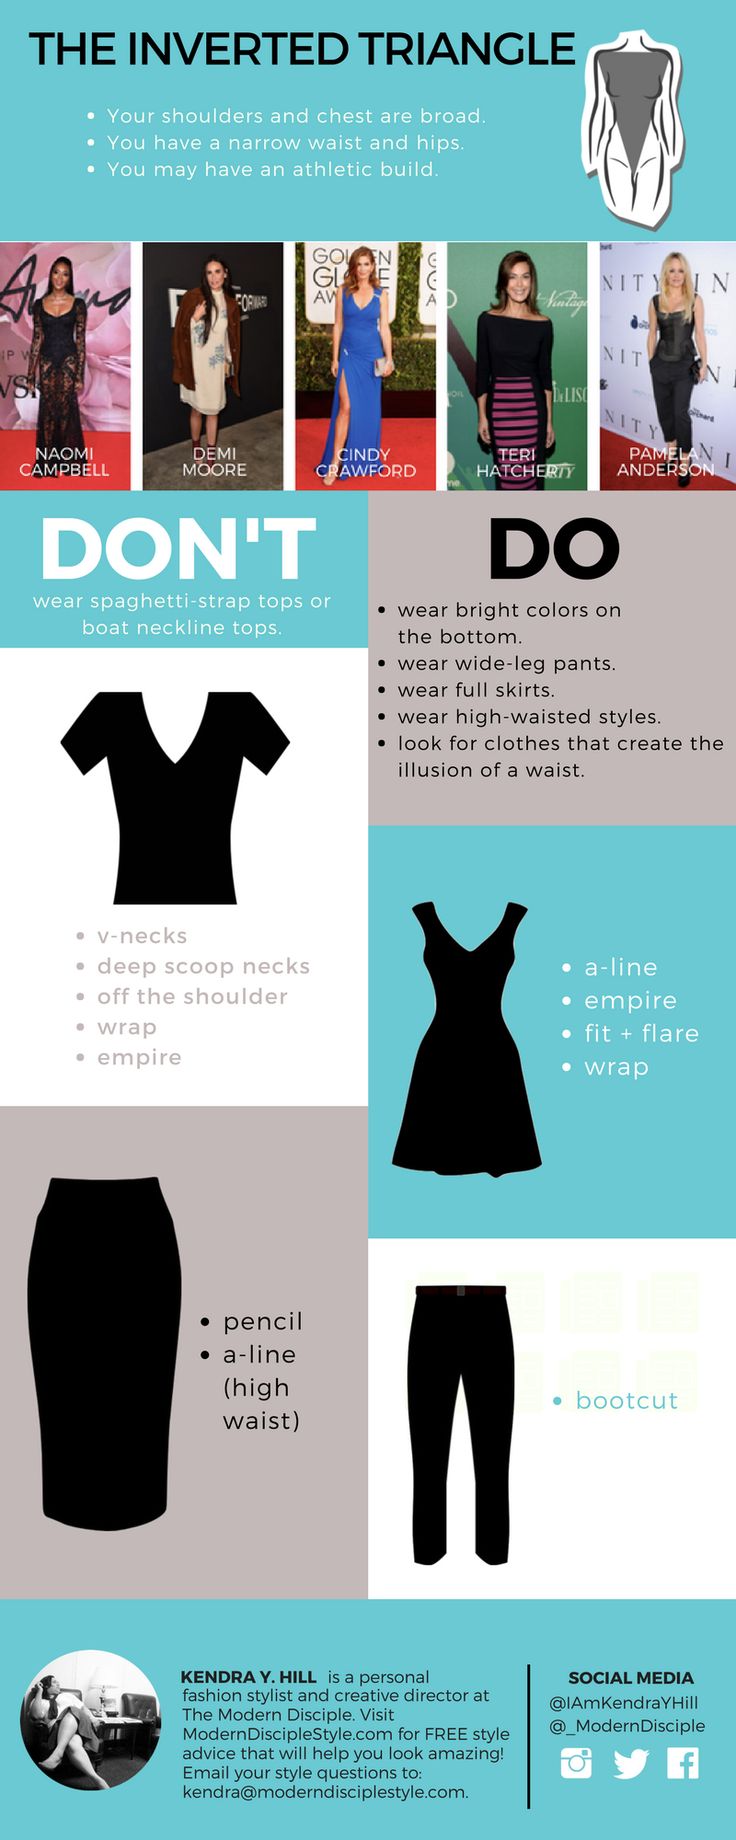 an info sheet showing the different types of clothing